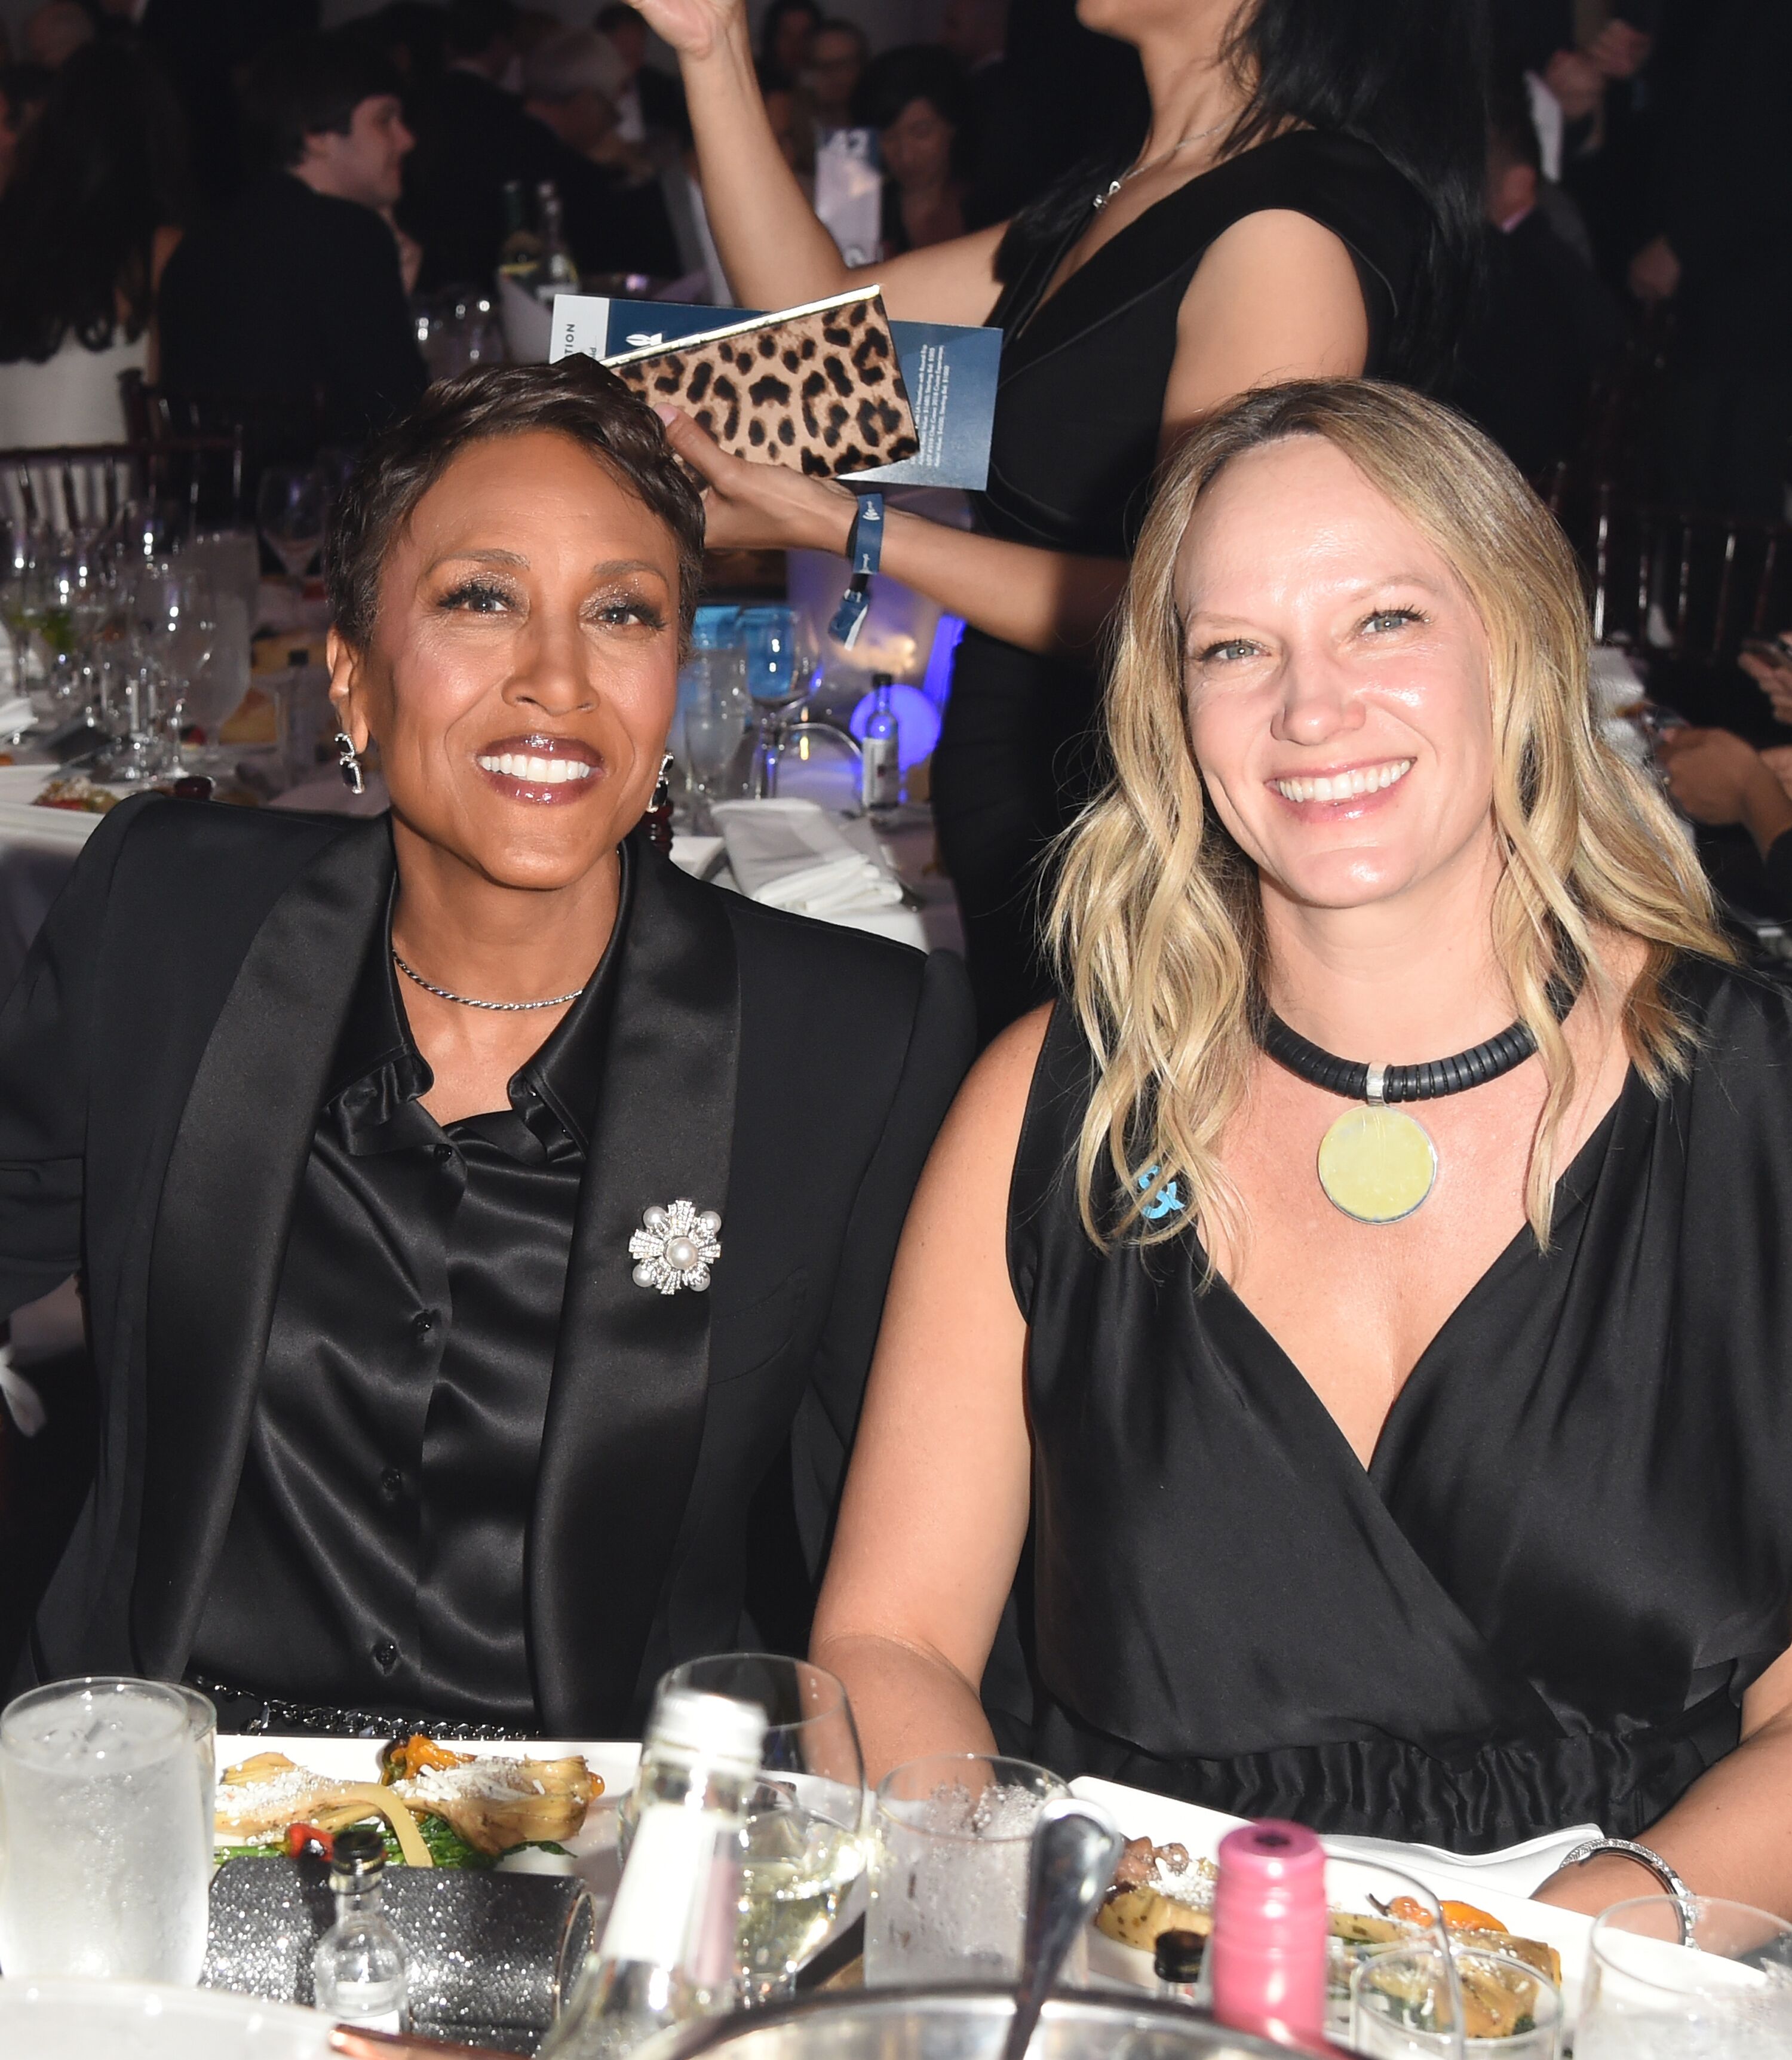 Robin Roberts and Amber Laign at a formal event | Source: Getty Images/GlobalImagesUkraine